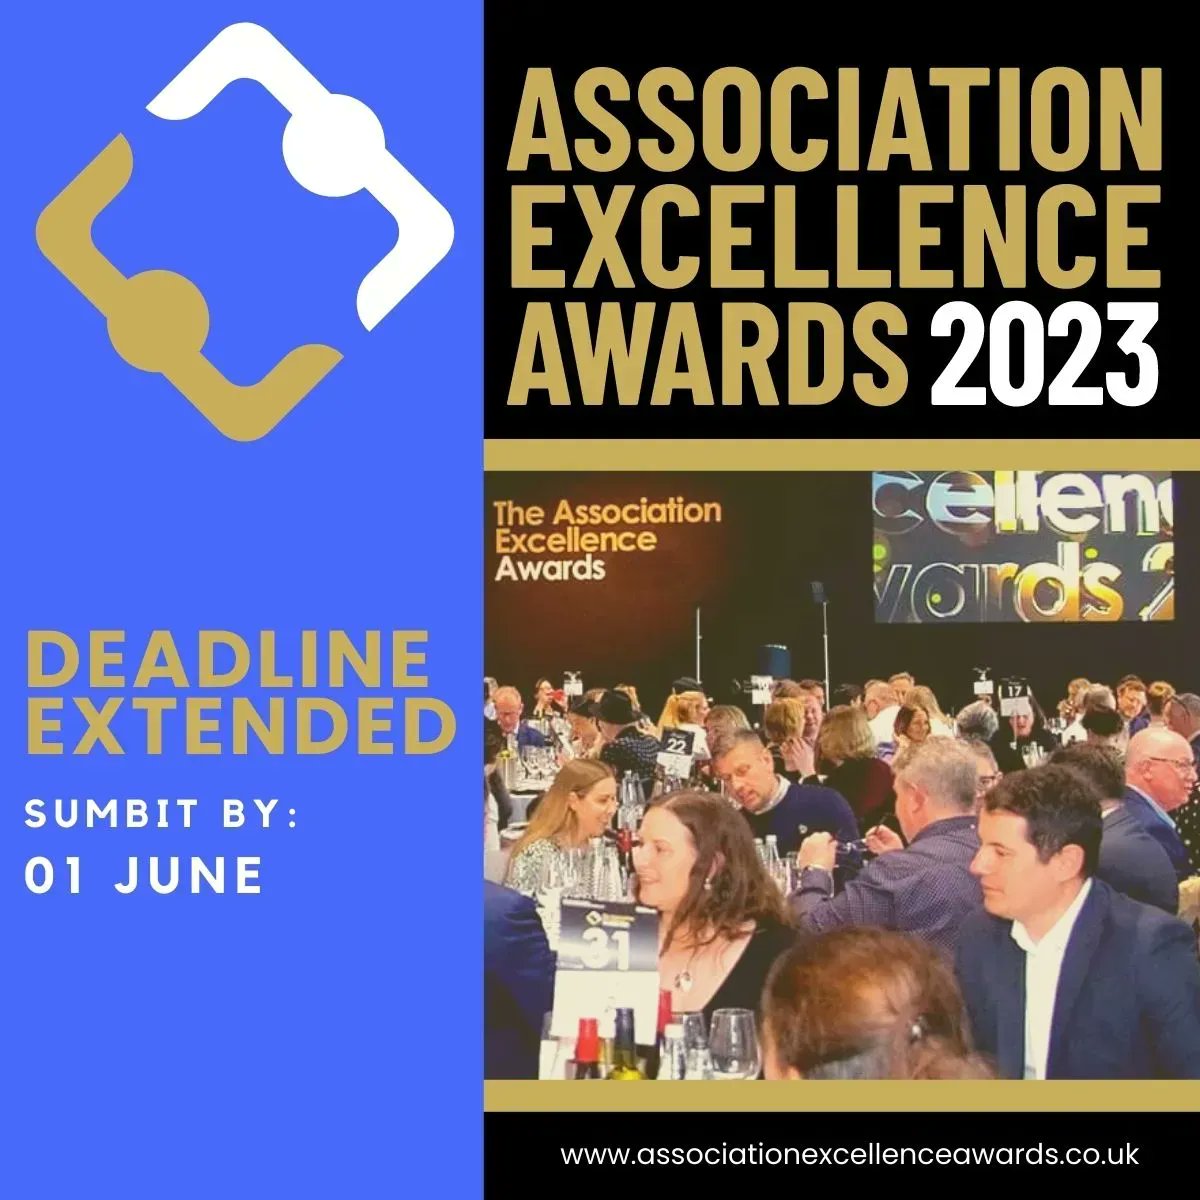 Association Excellence Awards 2023 - entry deadline THURSDAY! 
If you haven't yet - it's time to pick, polish, and perfect your entries!
▶️ bit.ly/3o1AyiP 
#AssociationExcellence